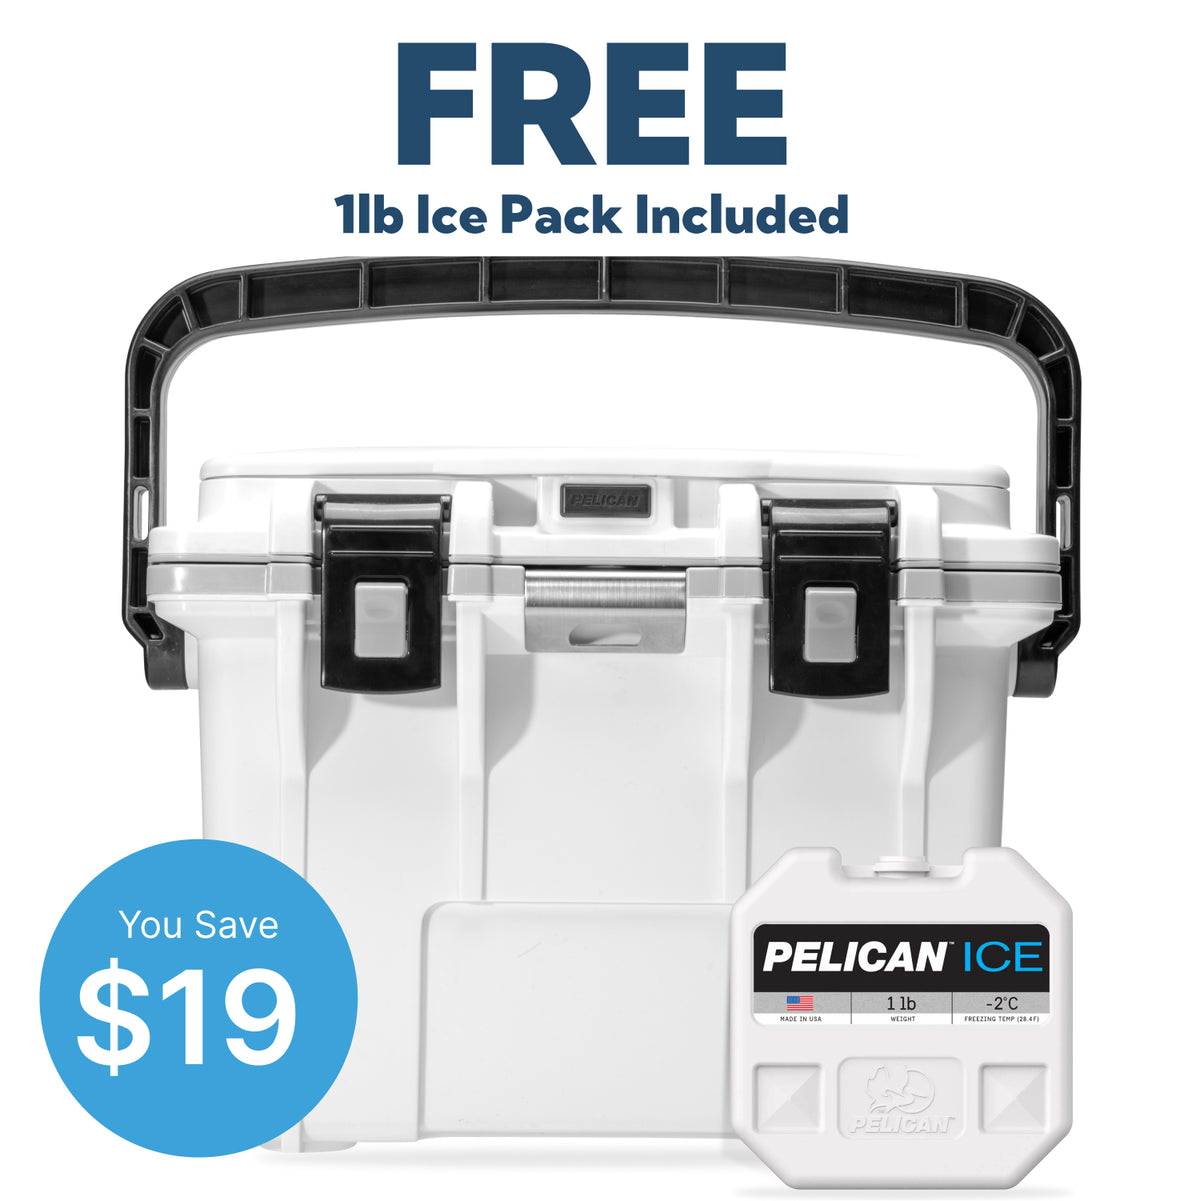 White / Grey Pelican 14QT Personal Cooler with Free 1lb Ice Pack